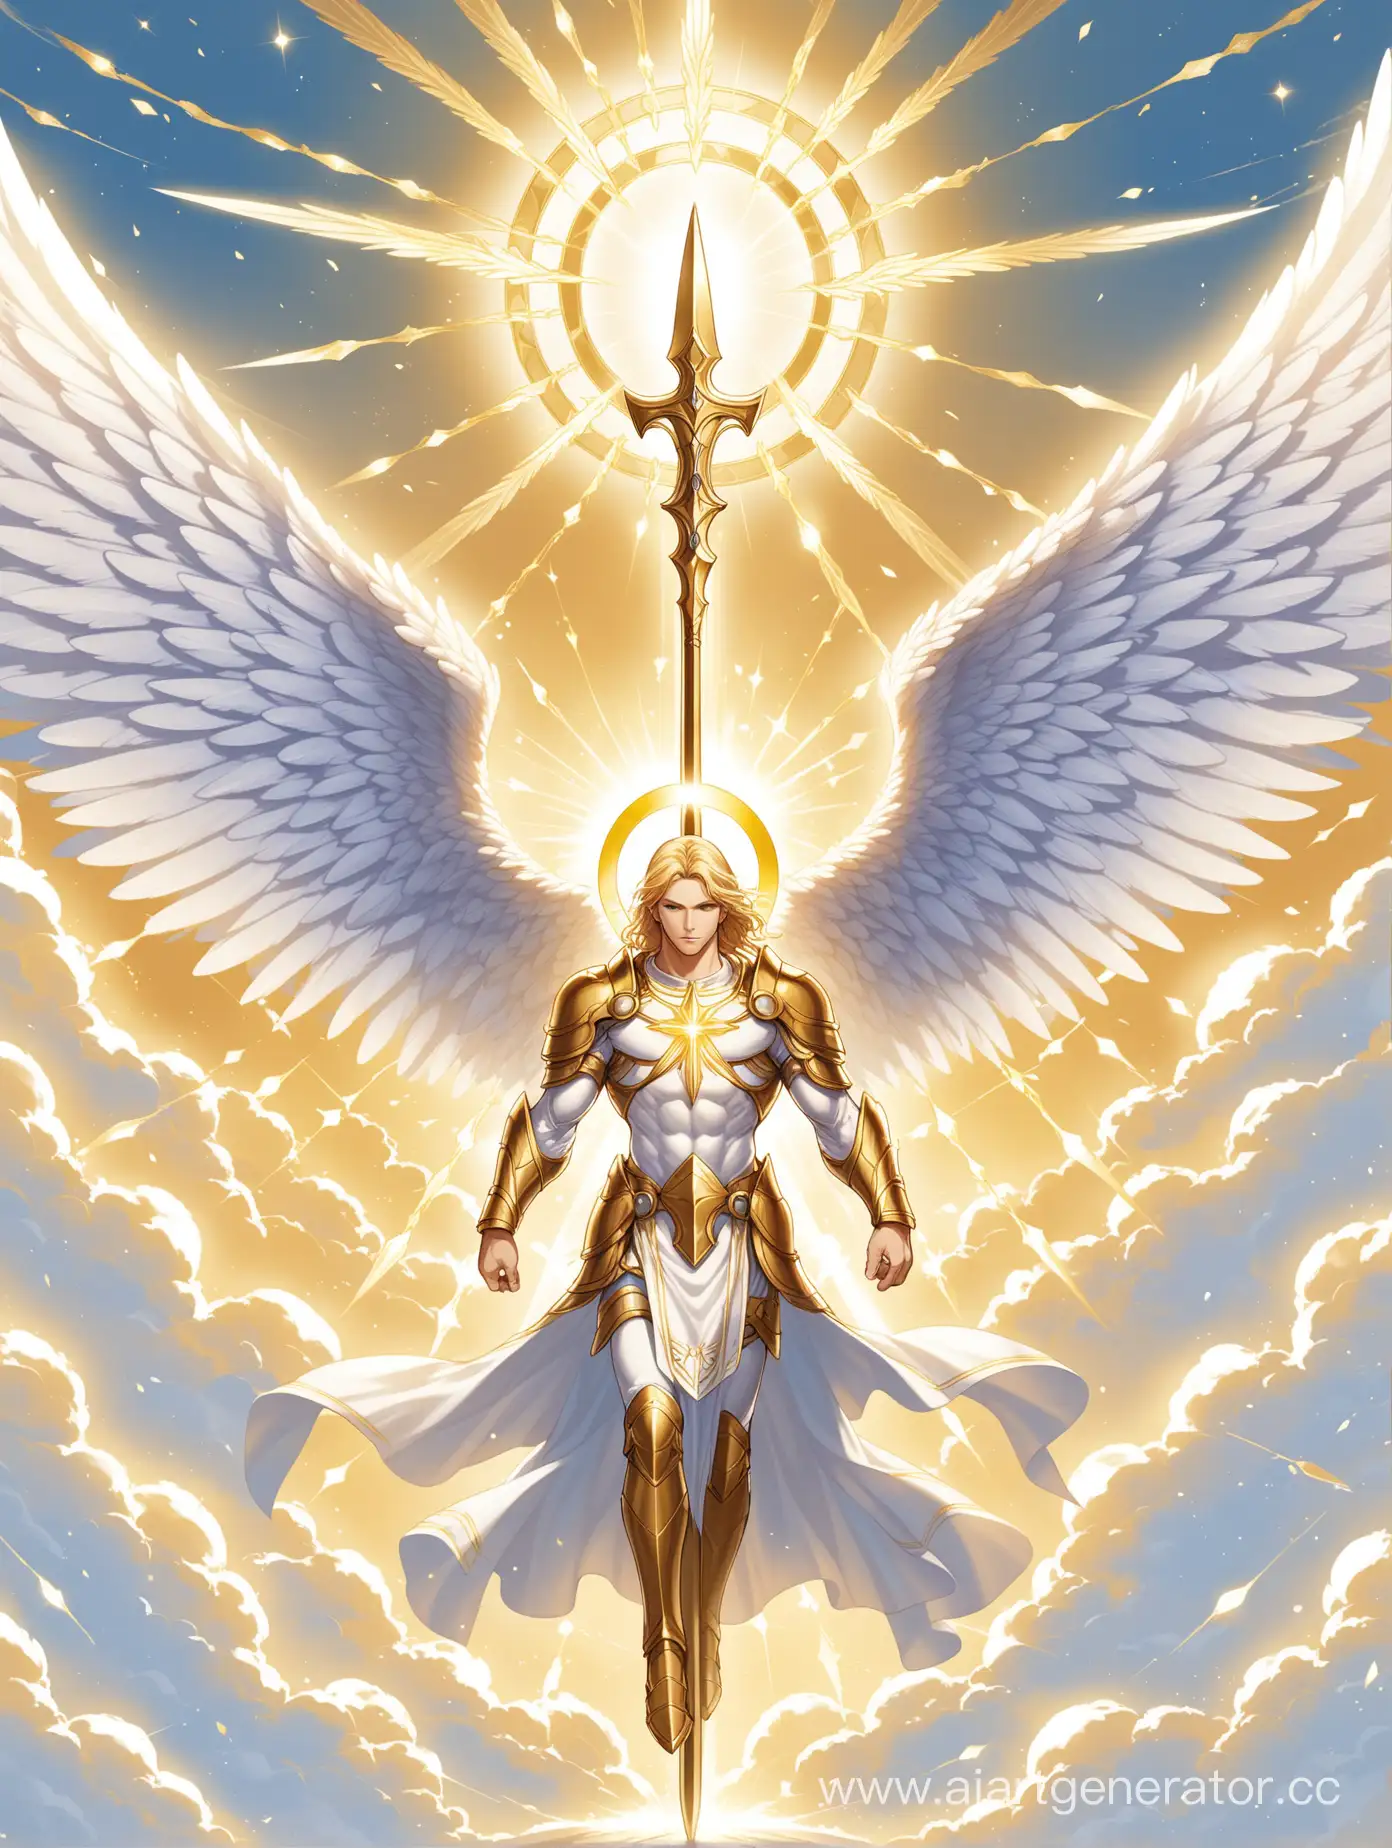 Divine-Archangel-with-Golden-Halo-and-Holy-Spear